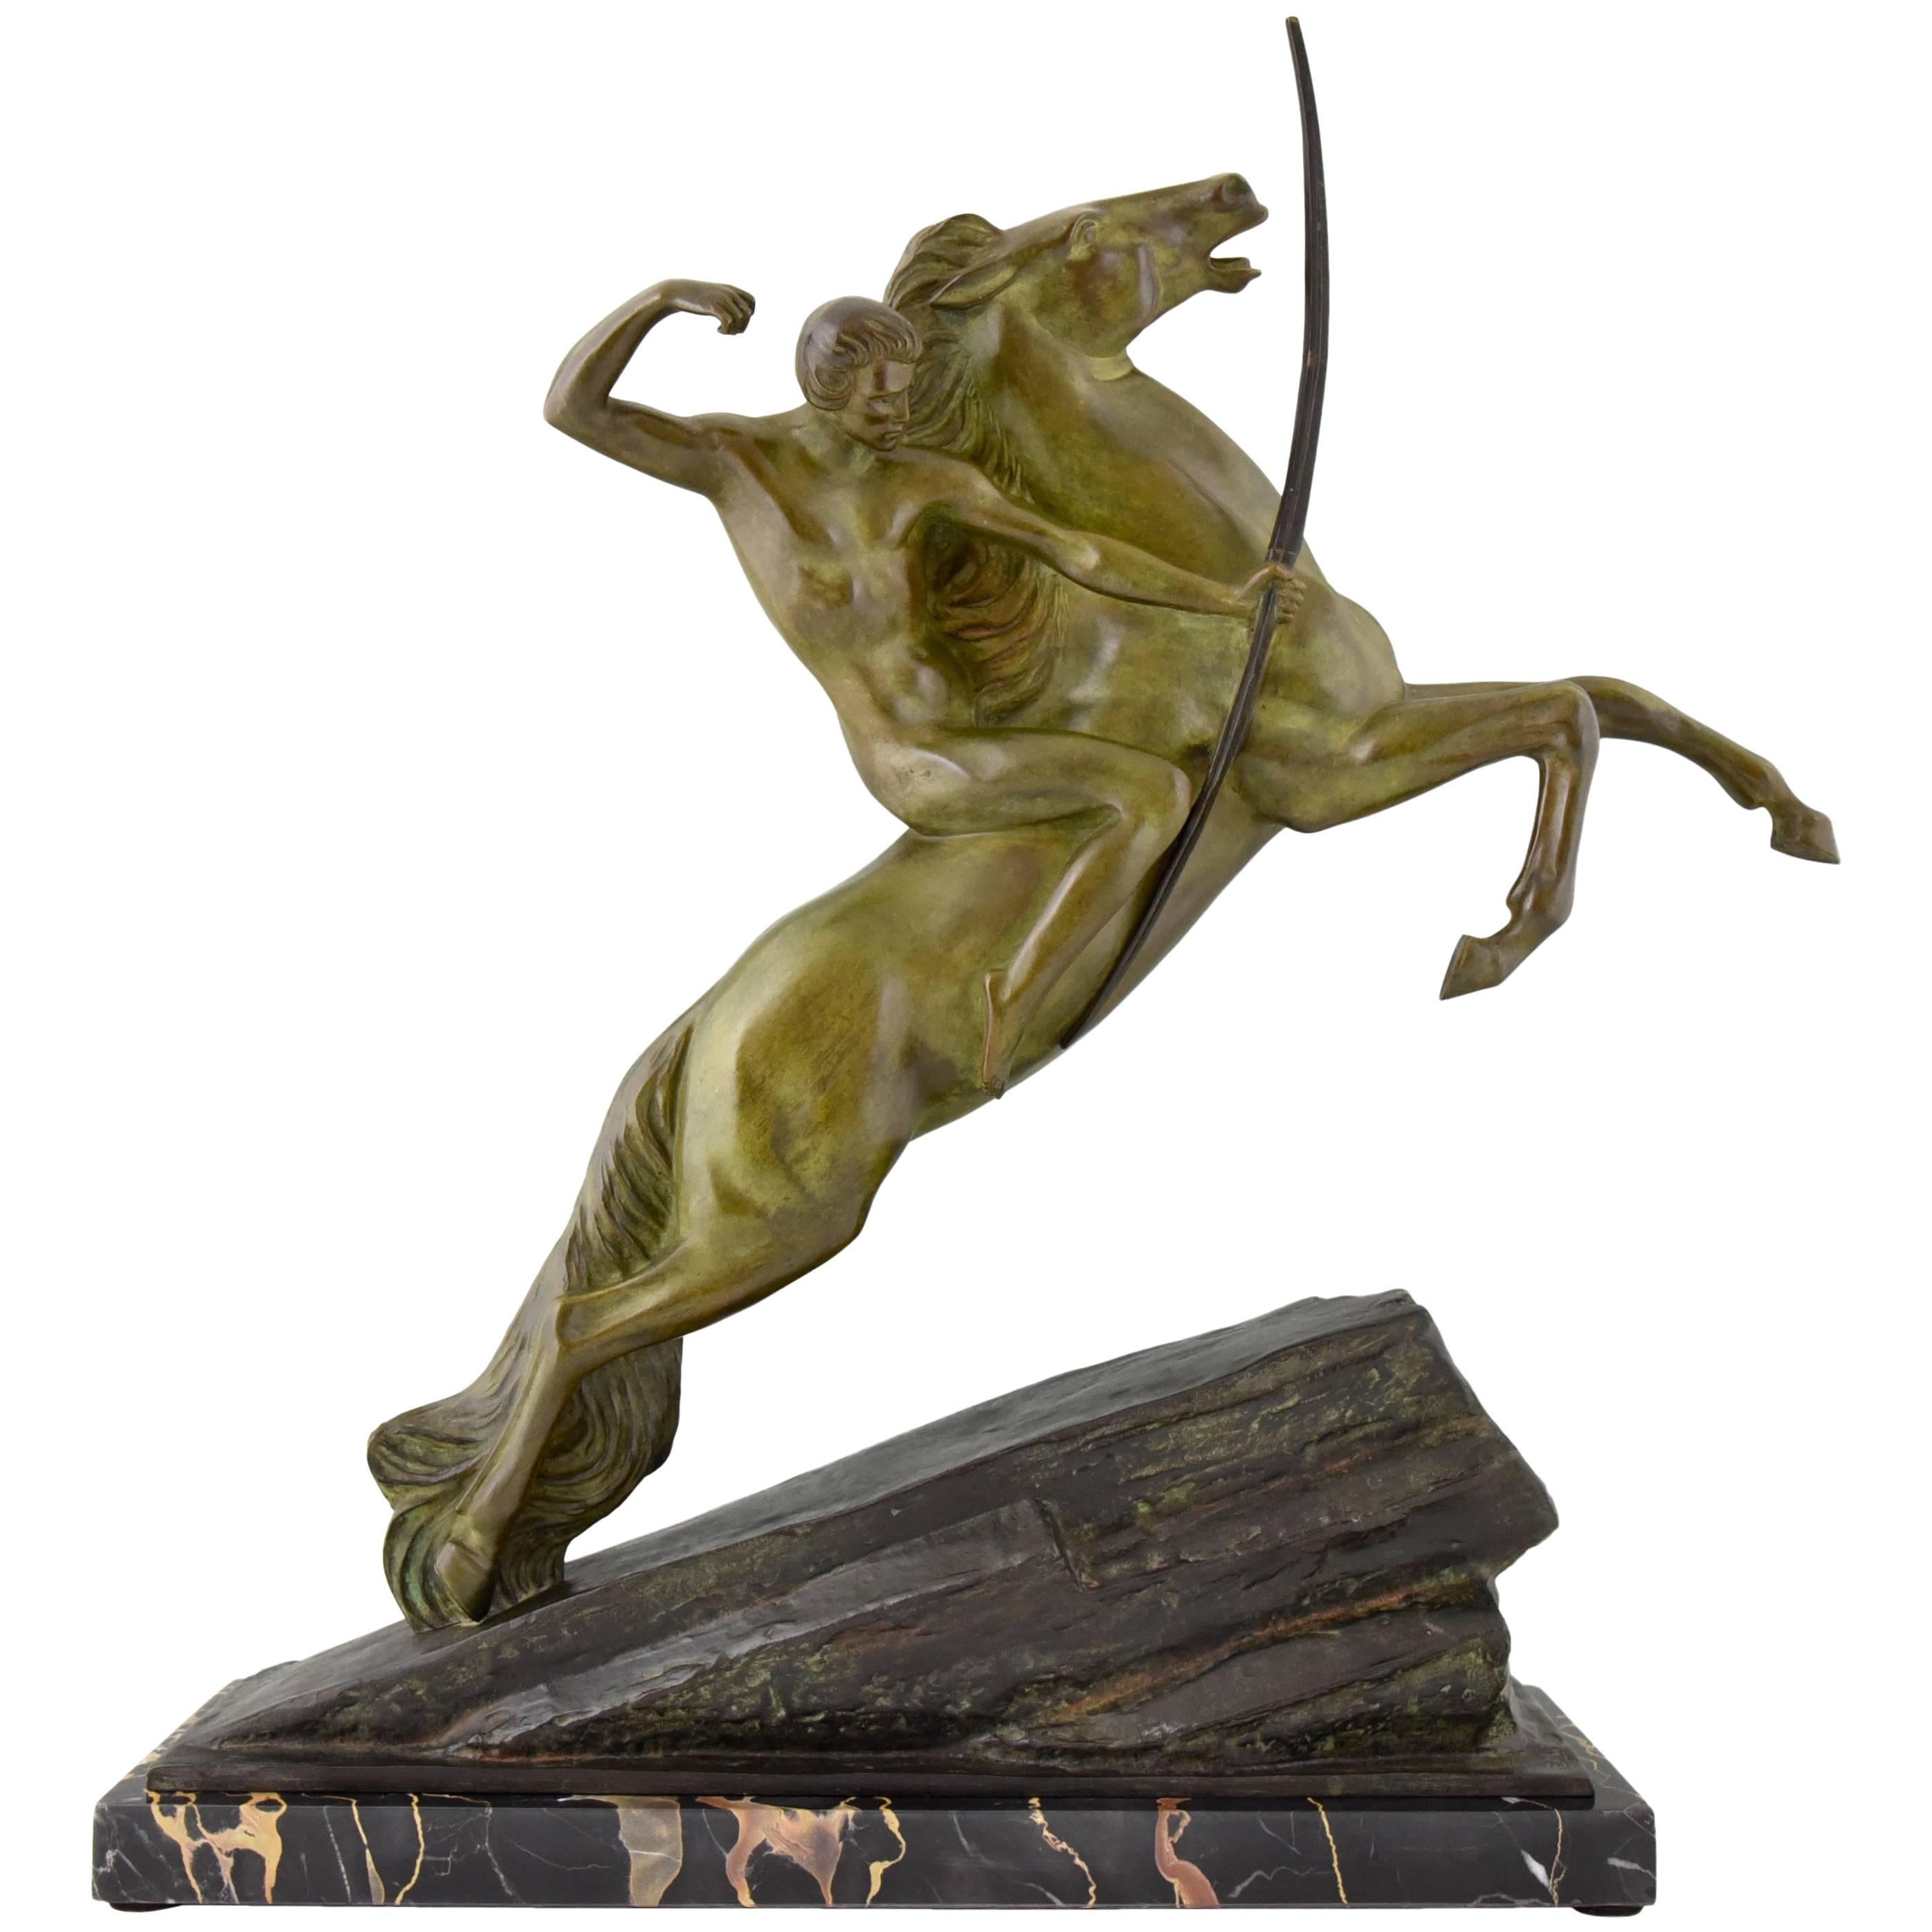 Art Deco Bronze Sculpture of an Archer on a Rearing Horse by Lemo, 1925